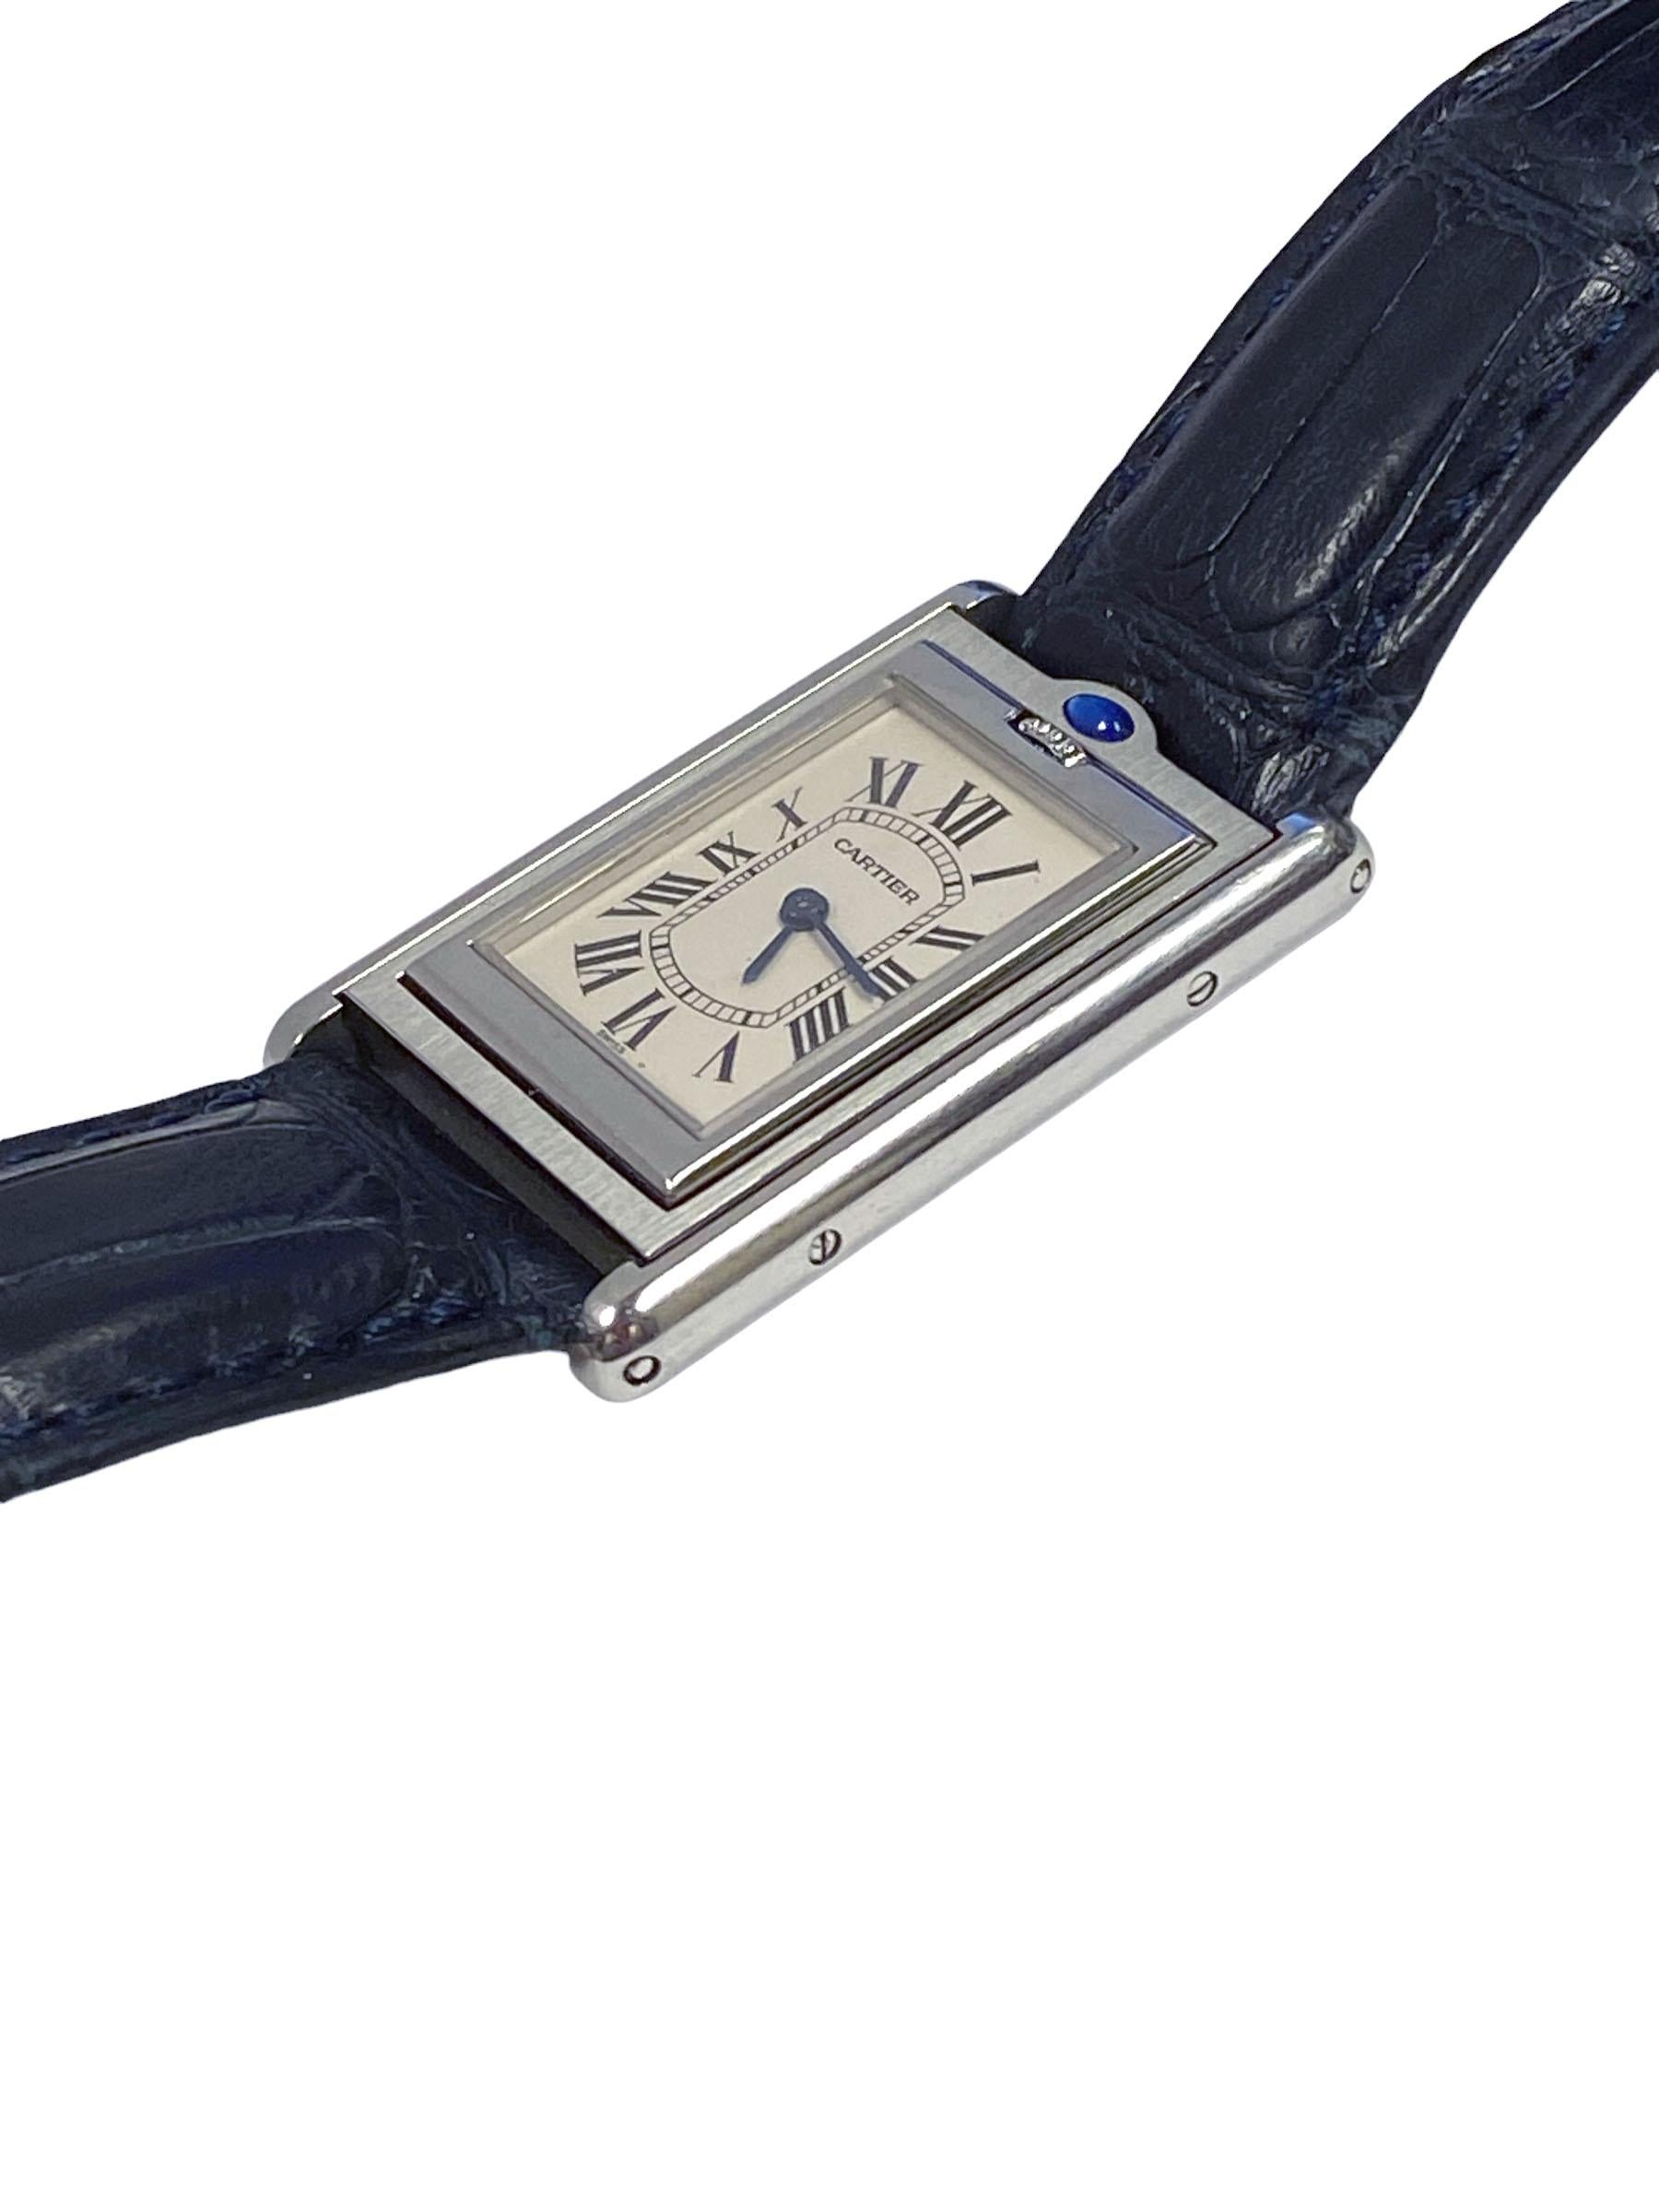 Circa 2000 Cartier Basculante reference 2405 Wrist Watch, 27 X 23.5 M.M. Stainless Steel 3 Piece case. Quartz movement, Silver White dial with Black Roman numerals and a Cabochon Sapphire at the pull to flip the watch. Original Black leather strap